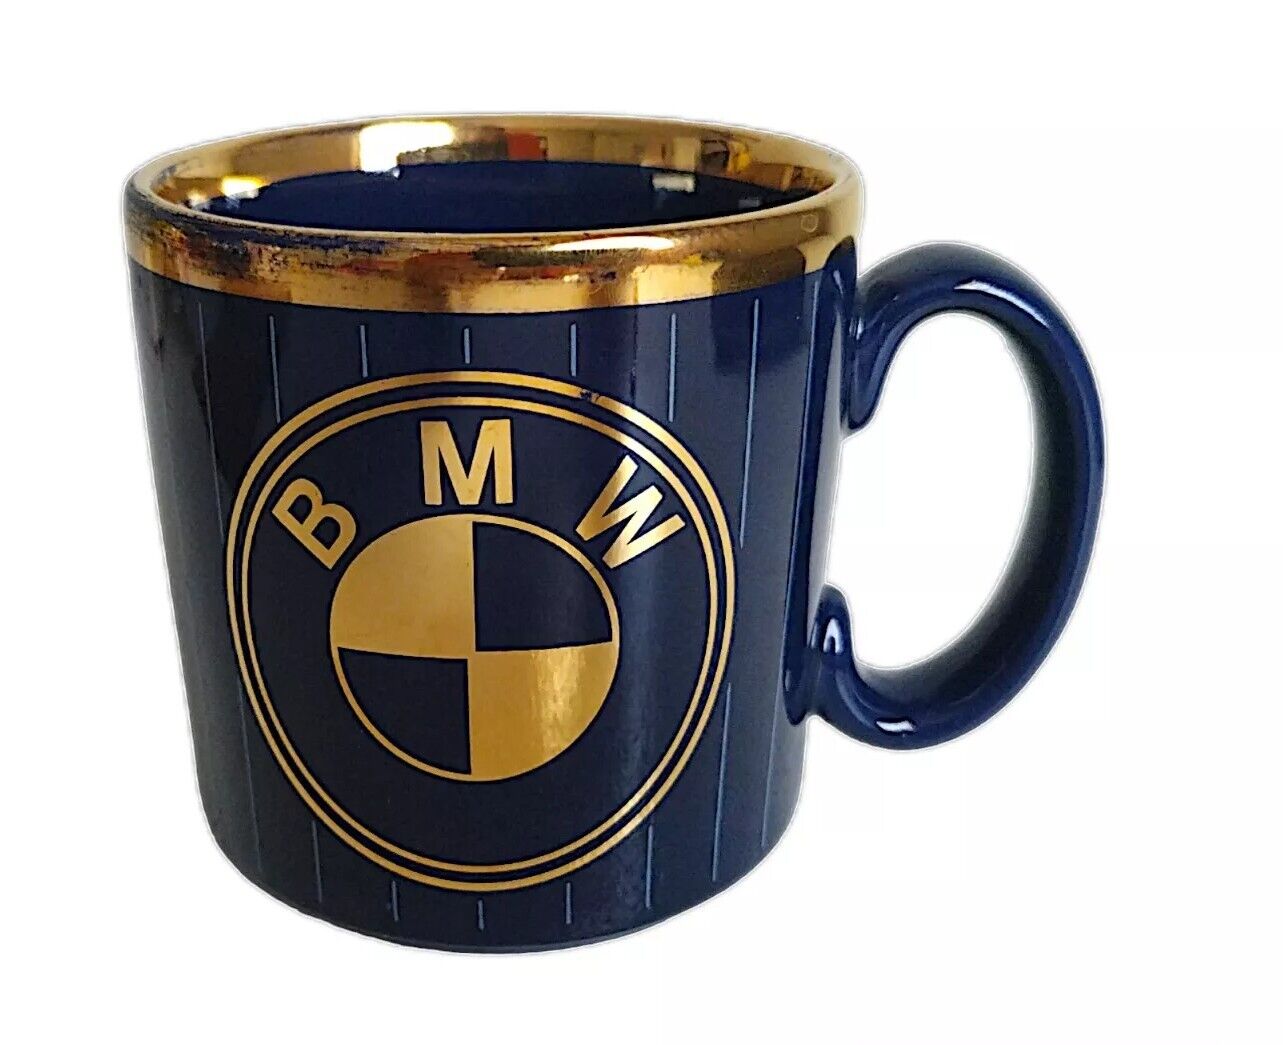 VTG BMW Owners Coffee Mug Cup Rare Made In England Blue Gold Stripe